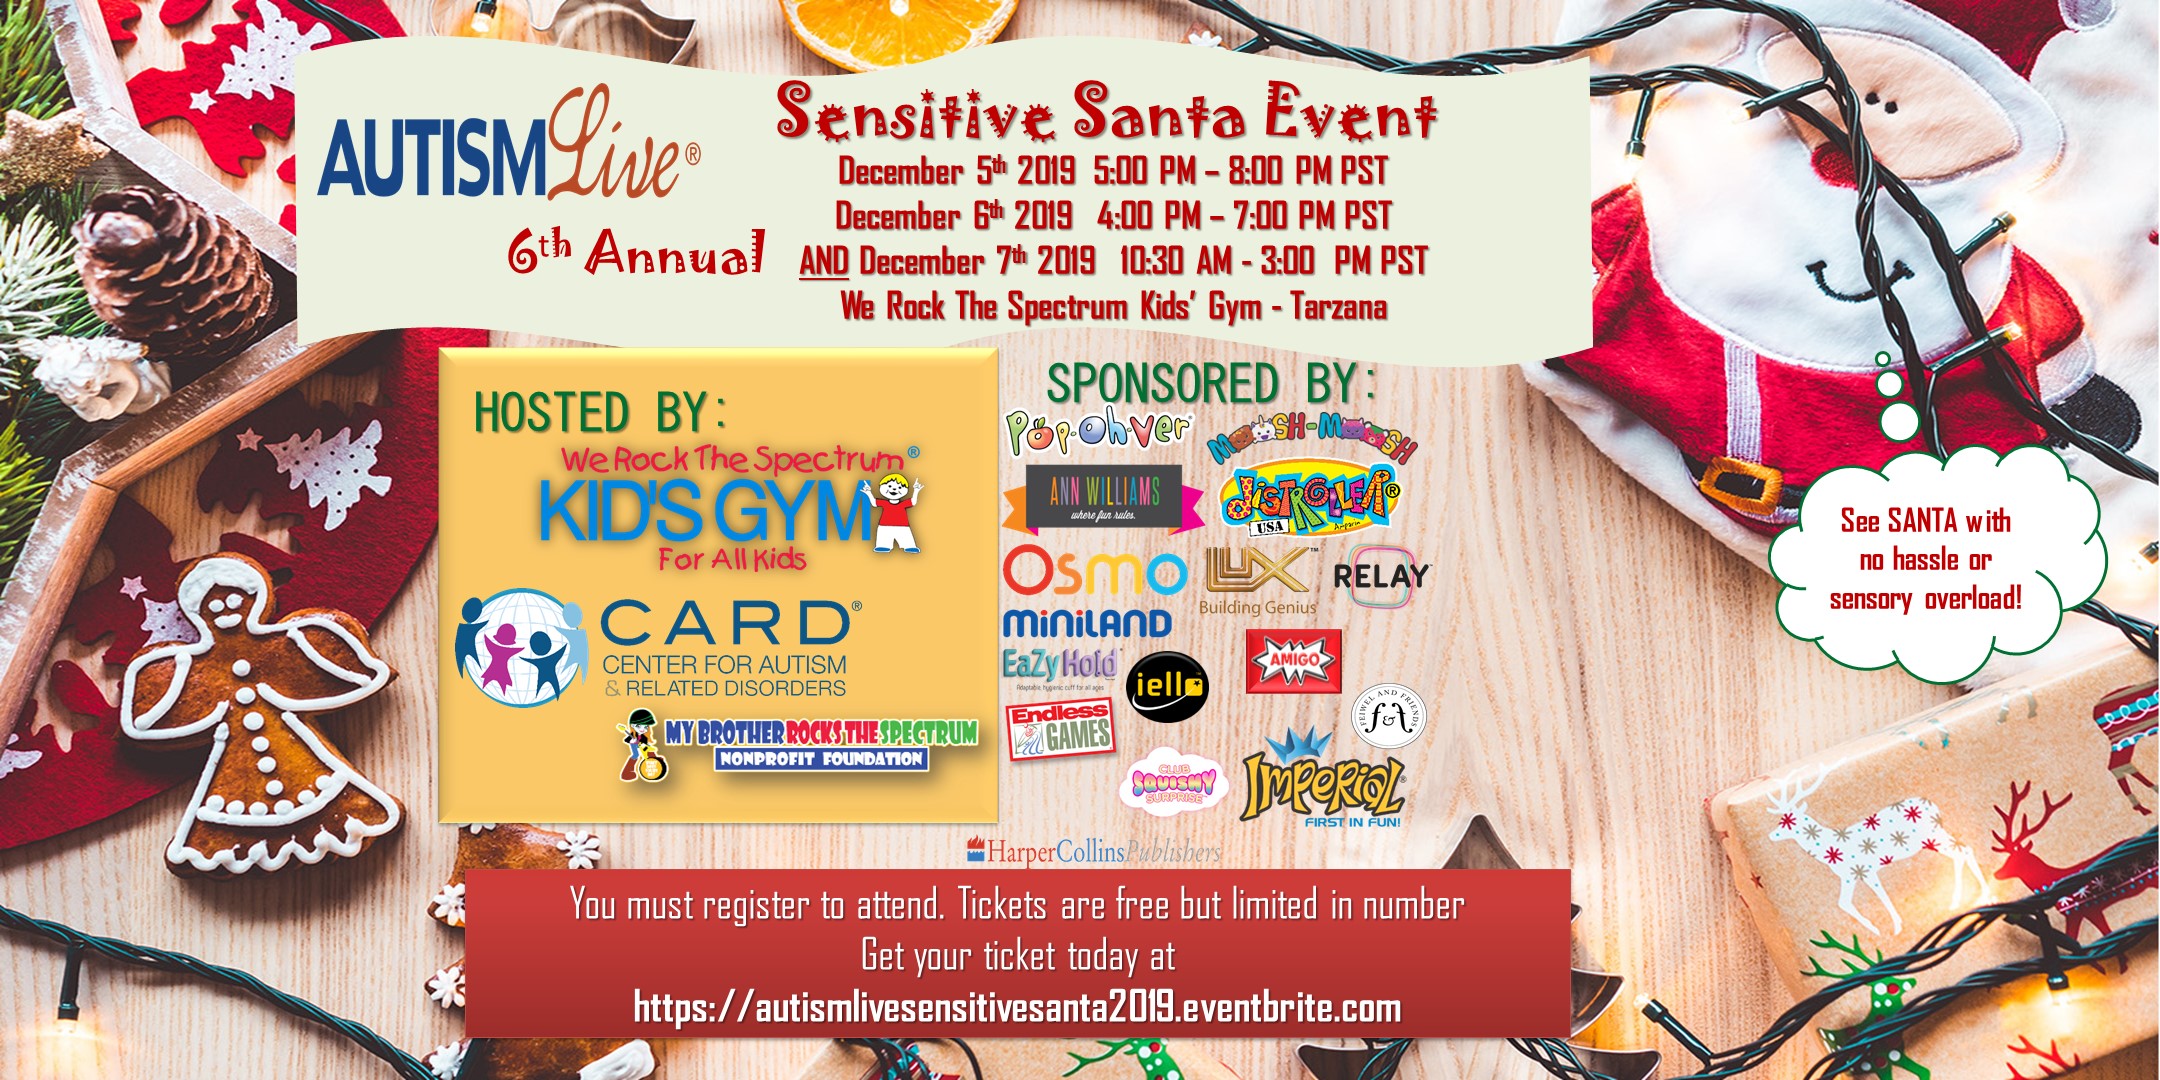 Event flyer for the Center for Autism and Related Disorders (CARD) Sensitive Santa 2019 at We Rock The Spectrum Kids' Gym in Tarzana, California.